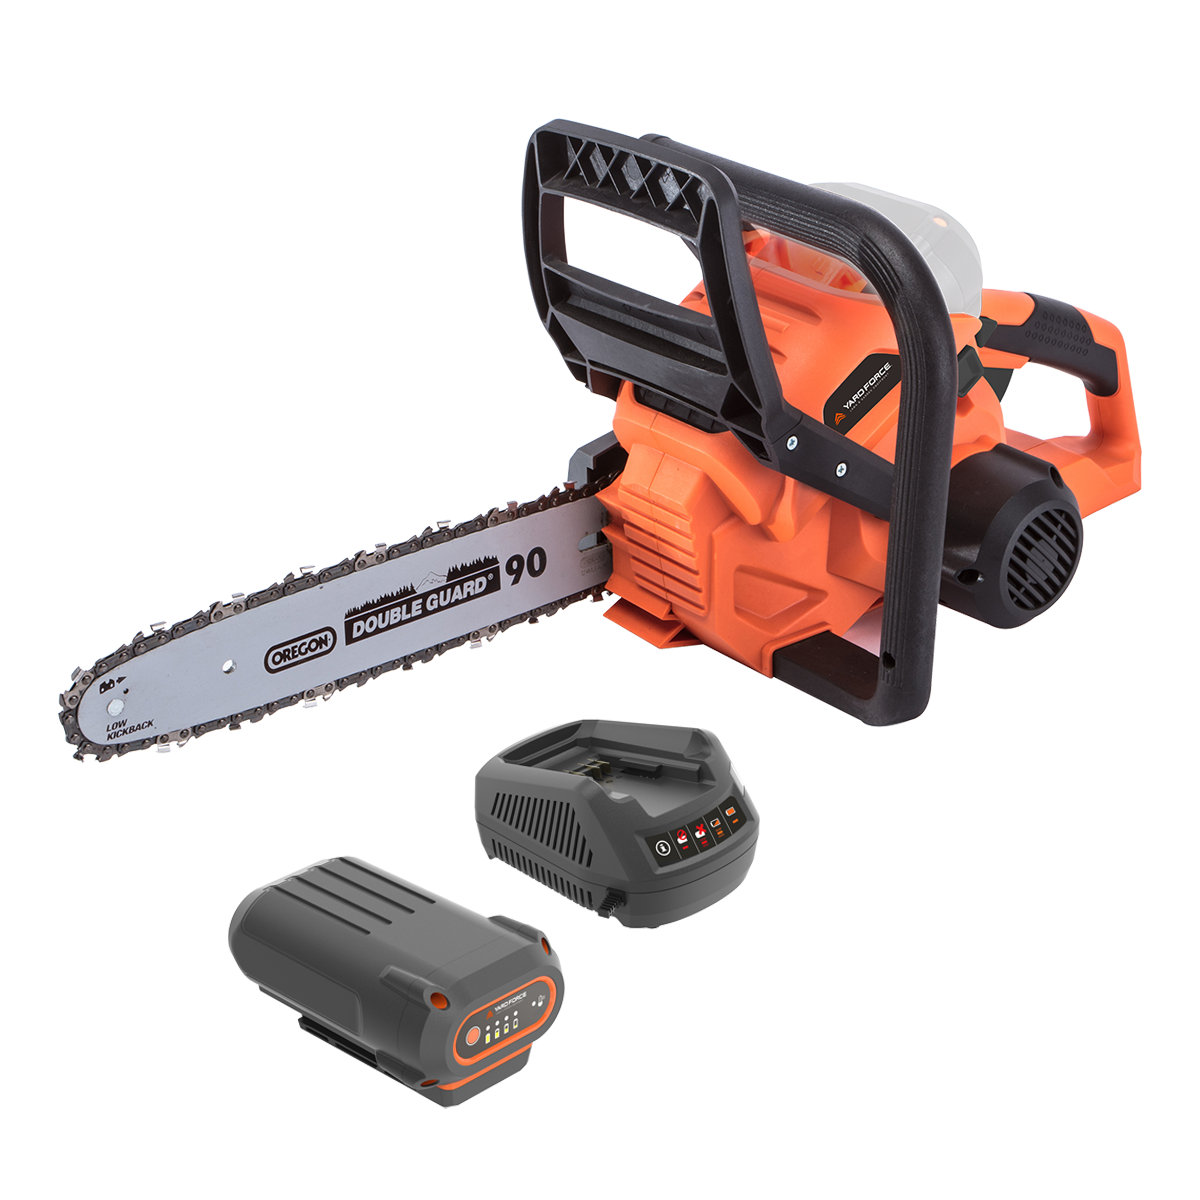 YARD FORCE 20V Double Battery Chainsaw LS C35W, 350mm Chain Rod Length,  8.5m/s Chain Speed, Ergonomic Soft Handle, No Battery and Charger,  Orange/Black : : Garden